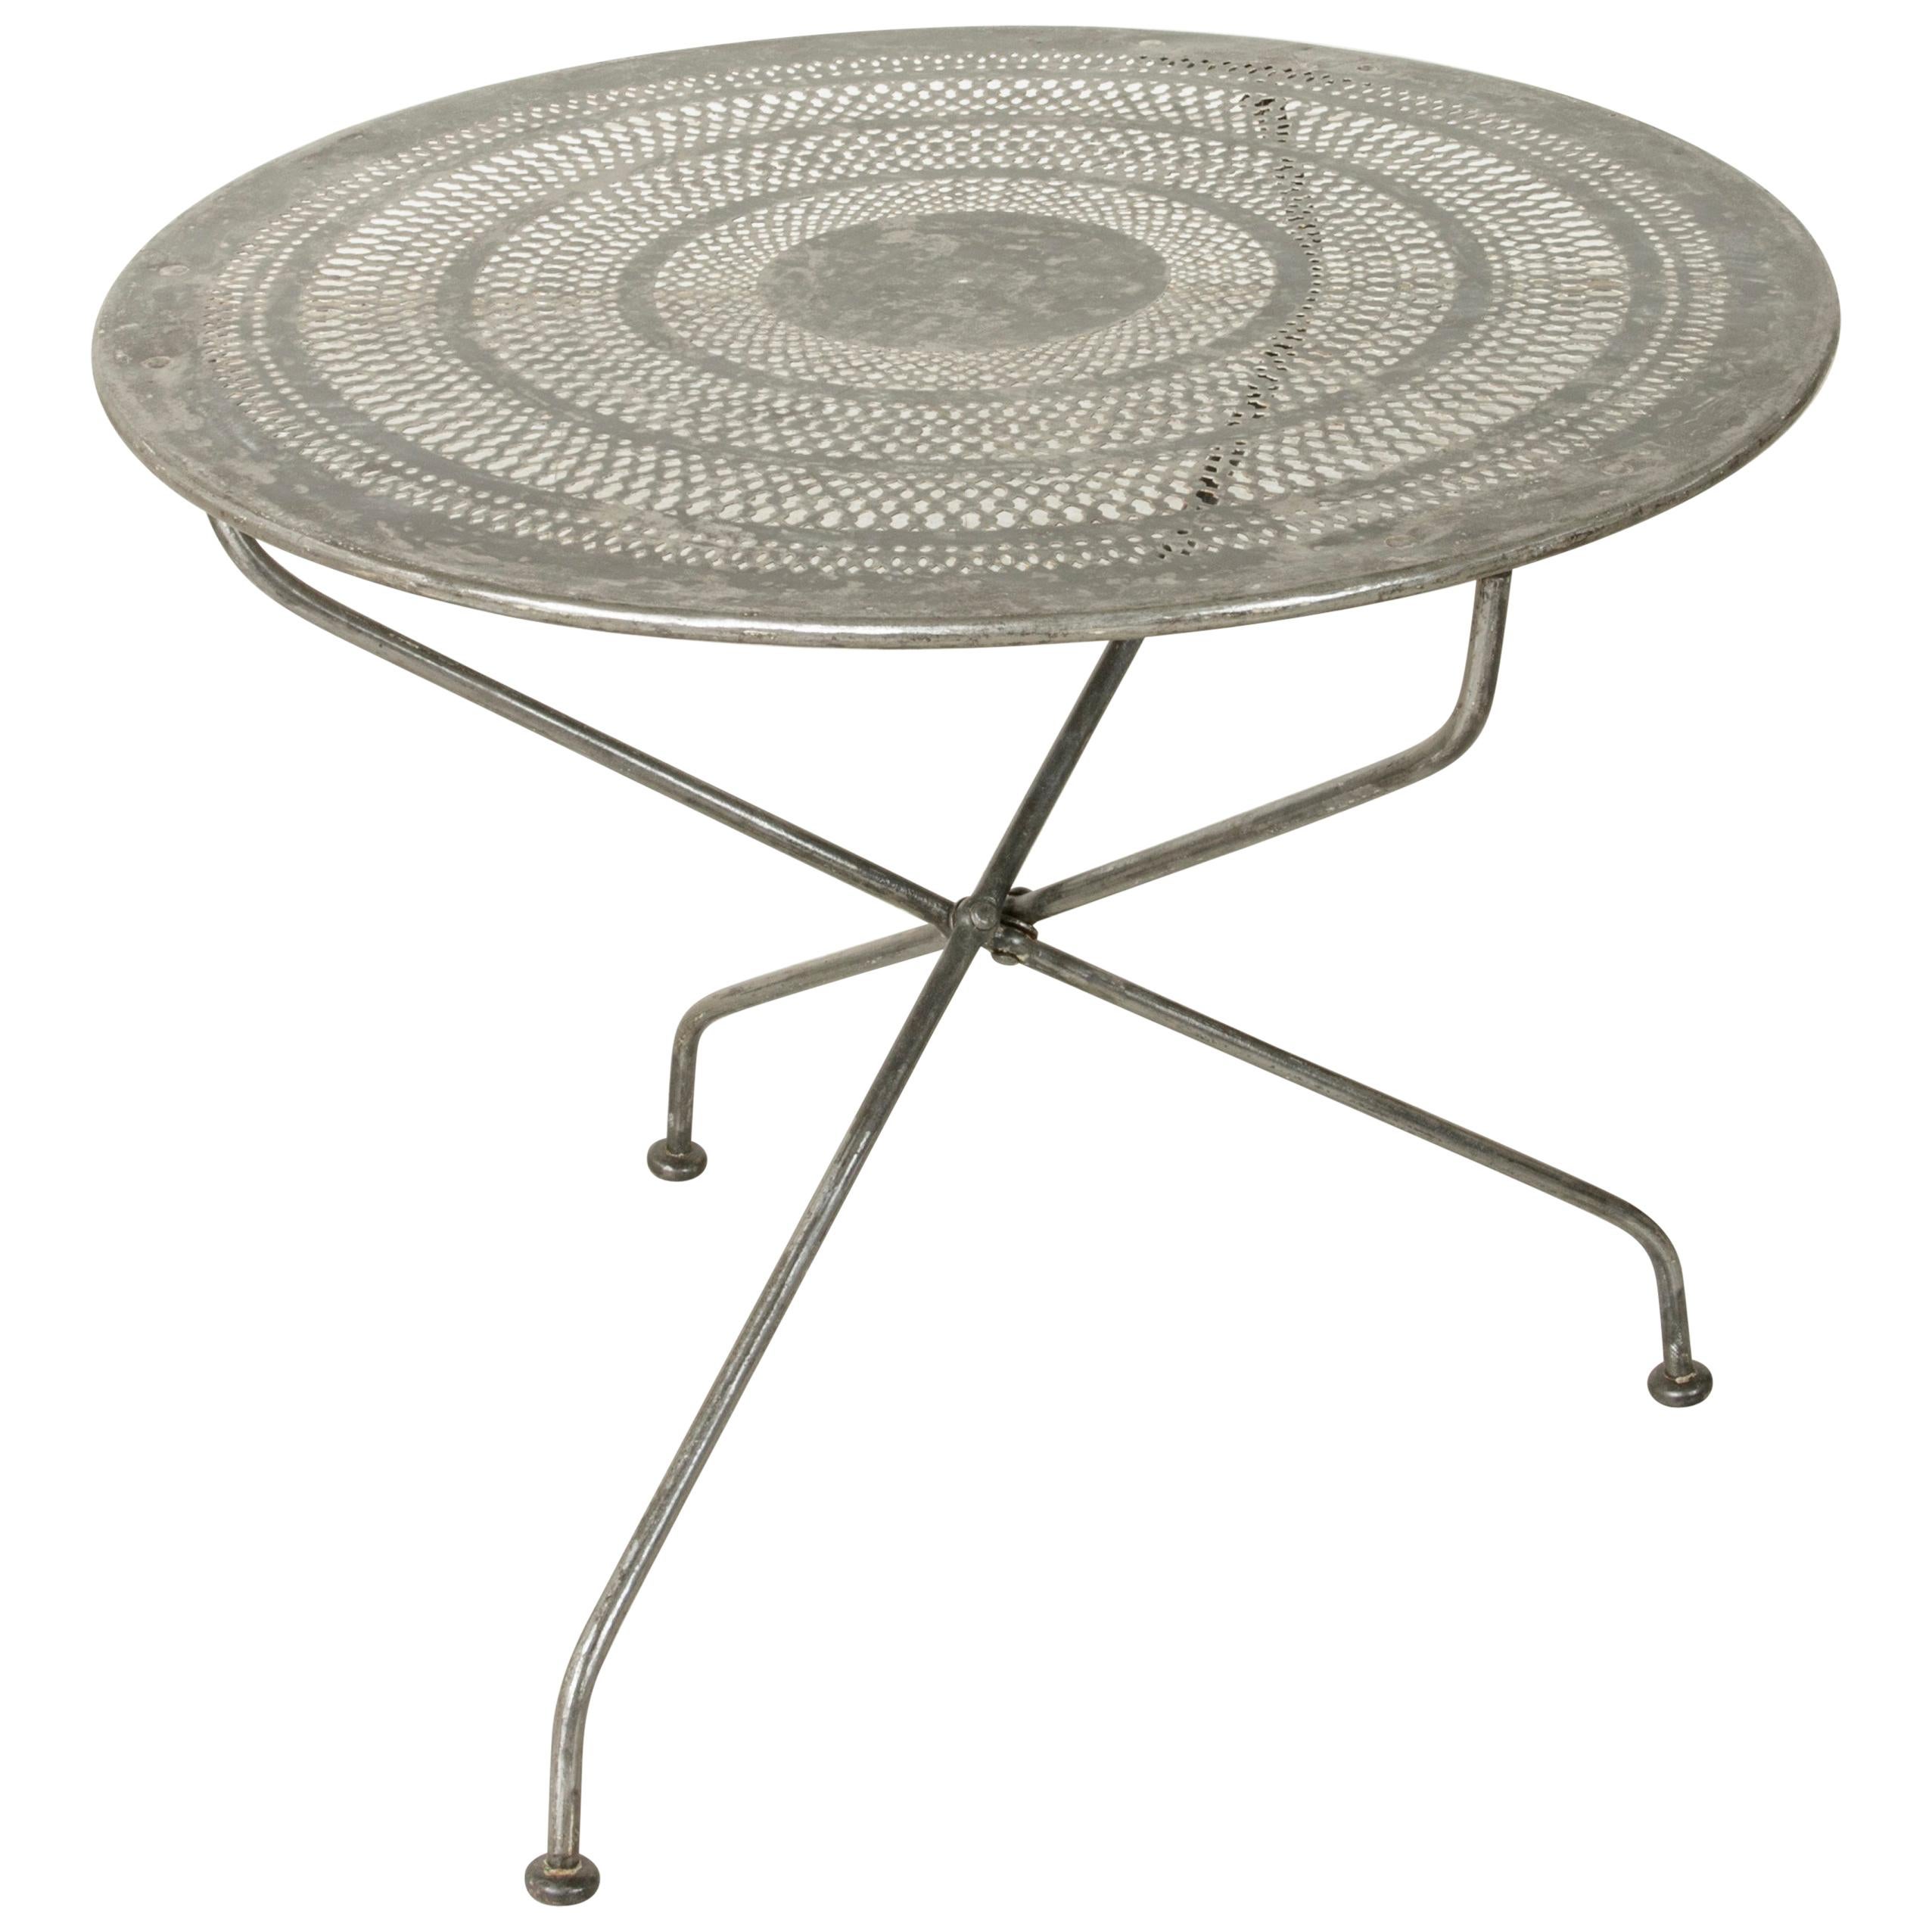 Mid-20th Century French Folding Pierced Metal Outdoor Garden Table, Cafe Table